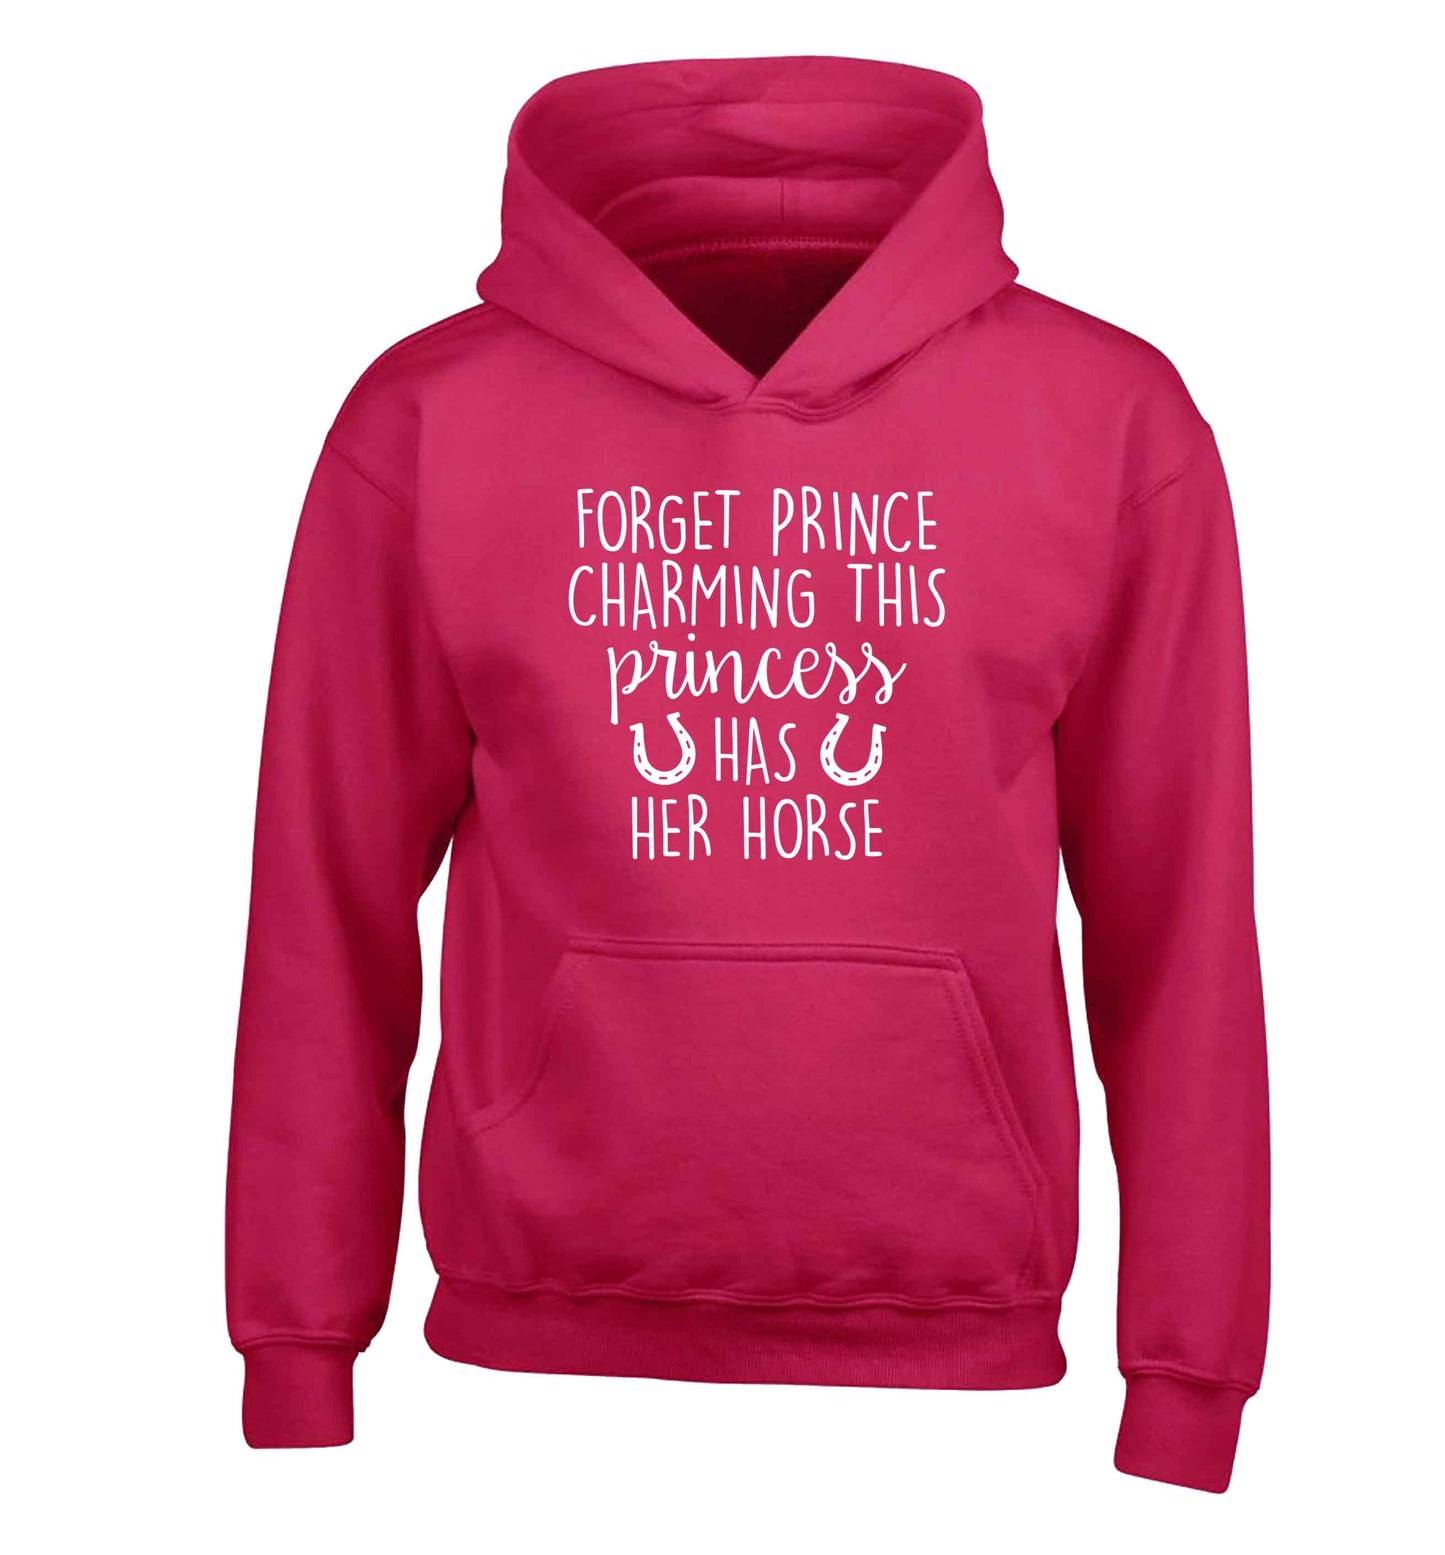 Forget prince charming this princess has her horse children's pink hoodie 12-13 Years